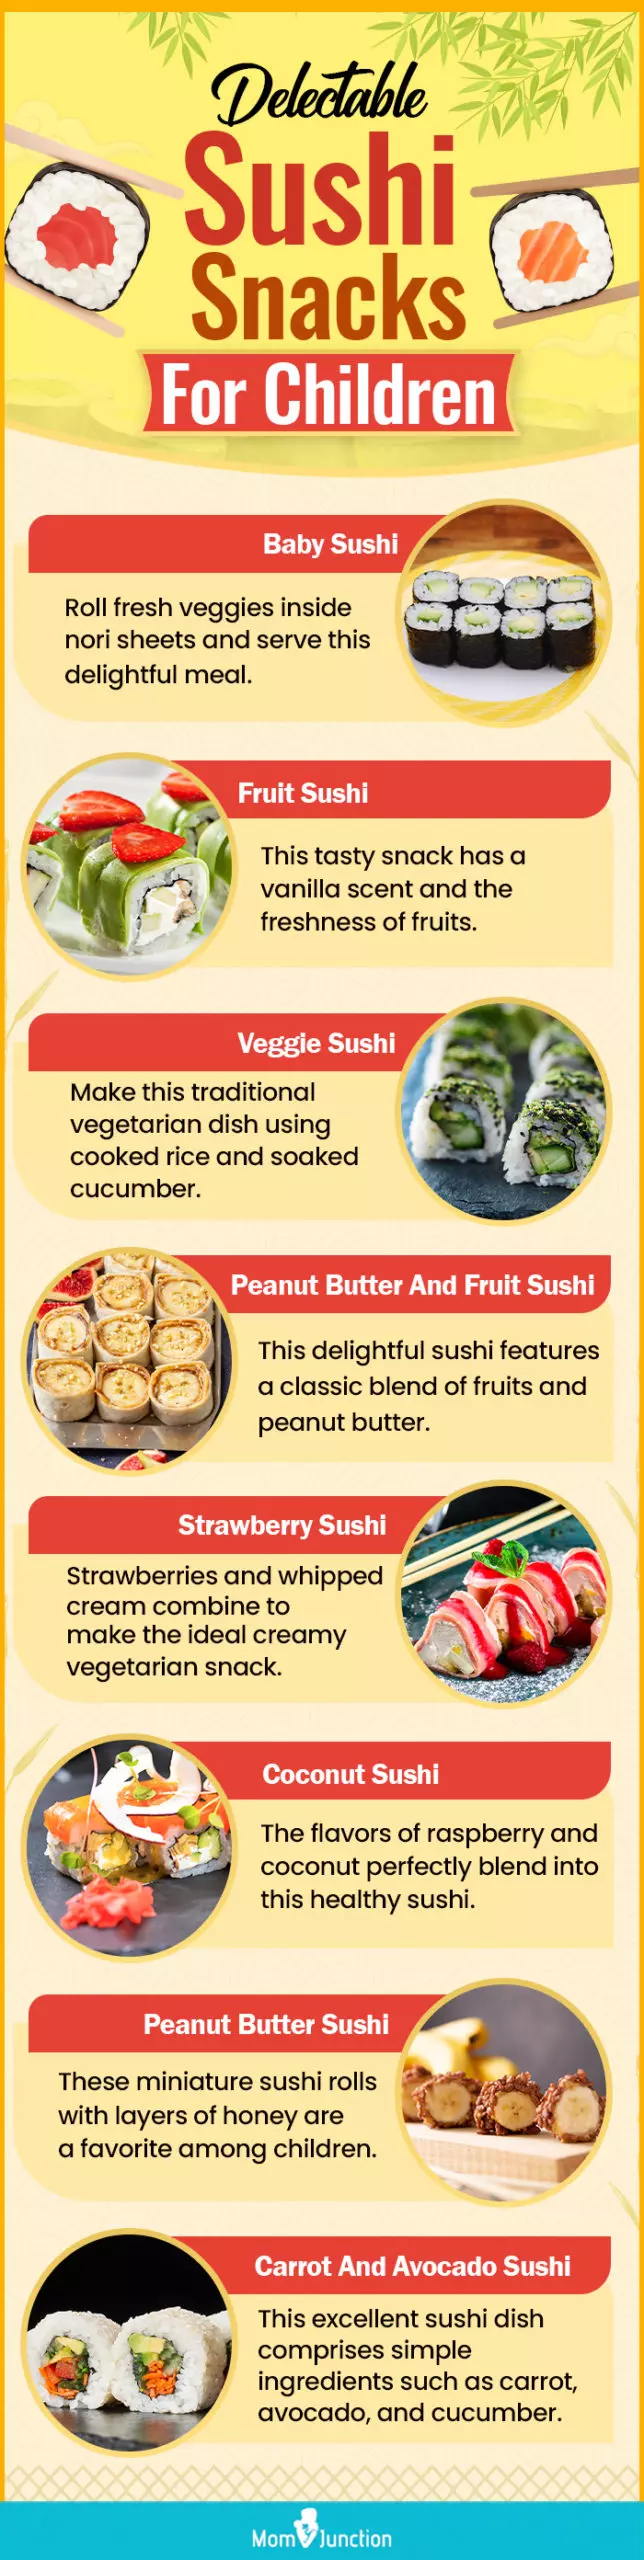 delectable sushi snacks for children (infographic)